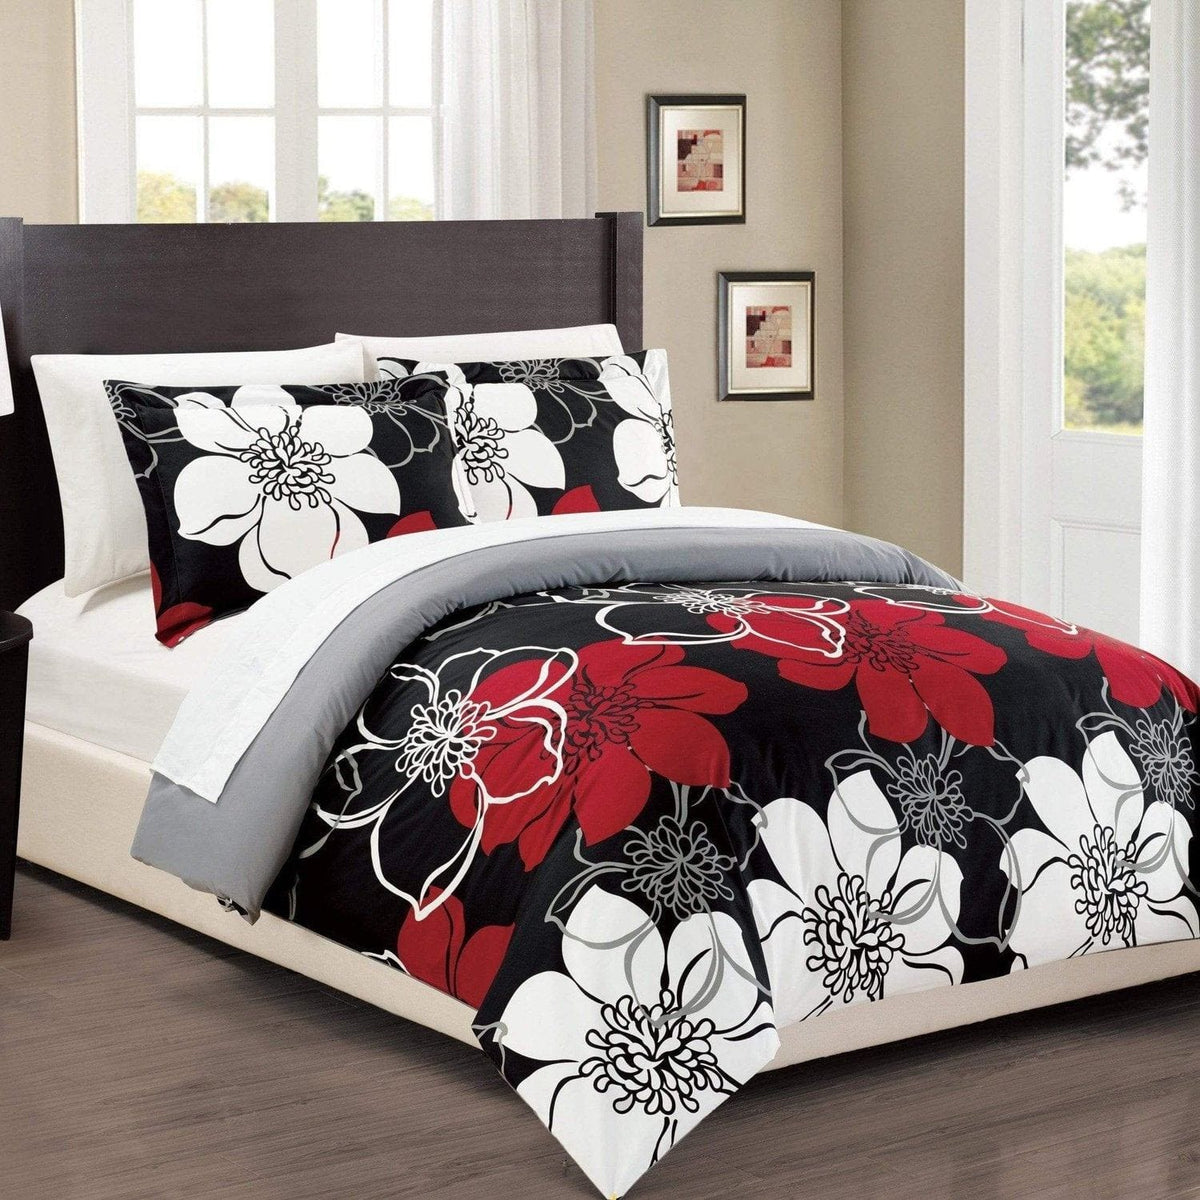 Chic Home Morning Glory 3 Piece Floral Duvet Cover Set Black